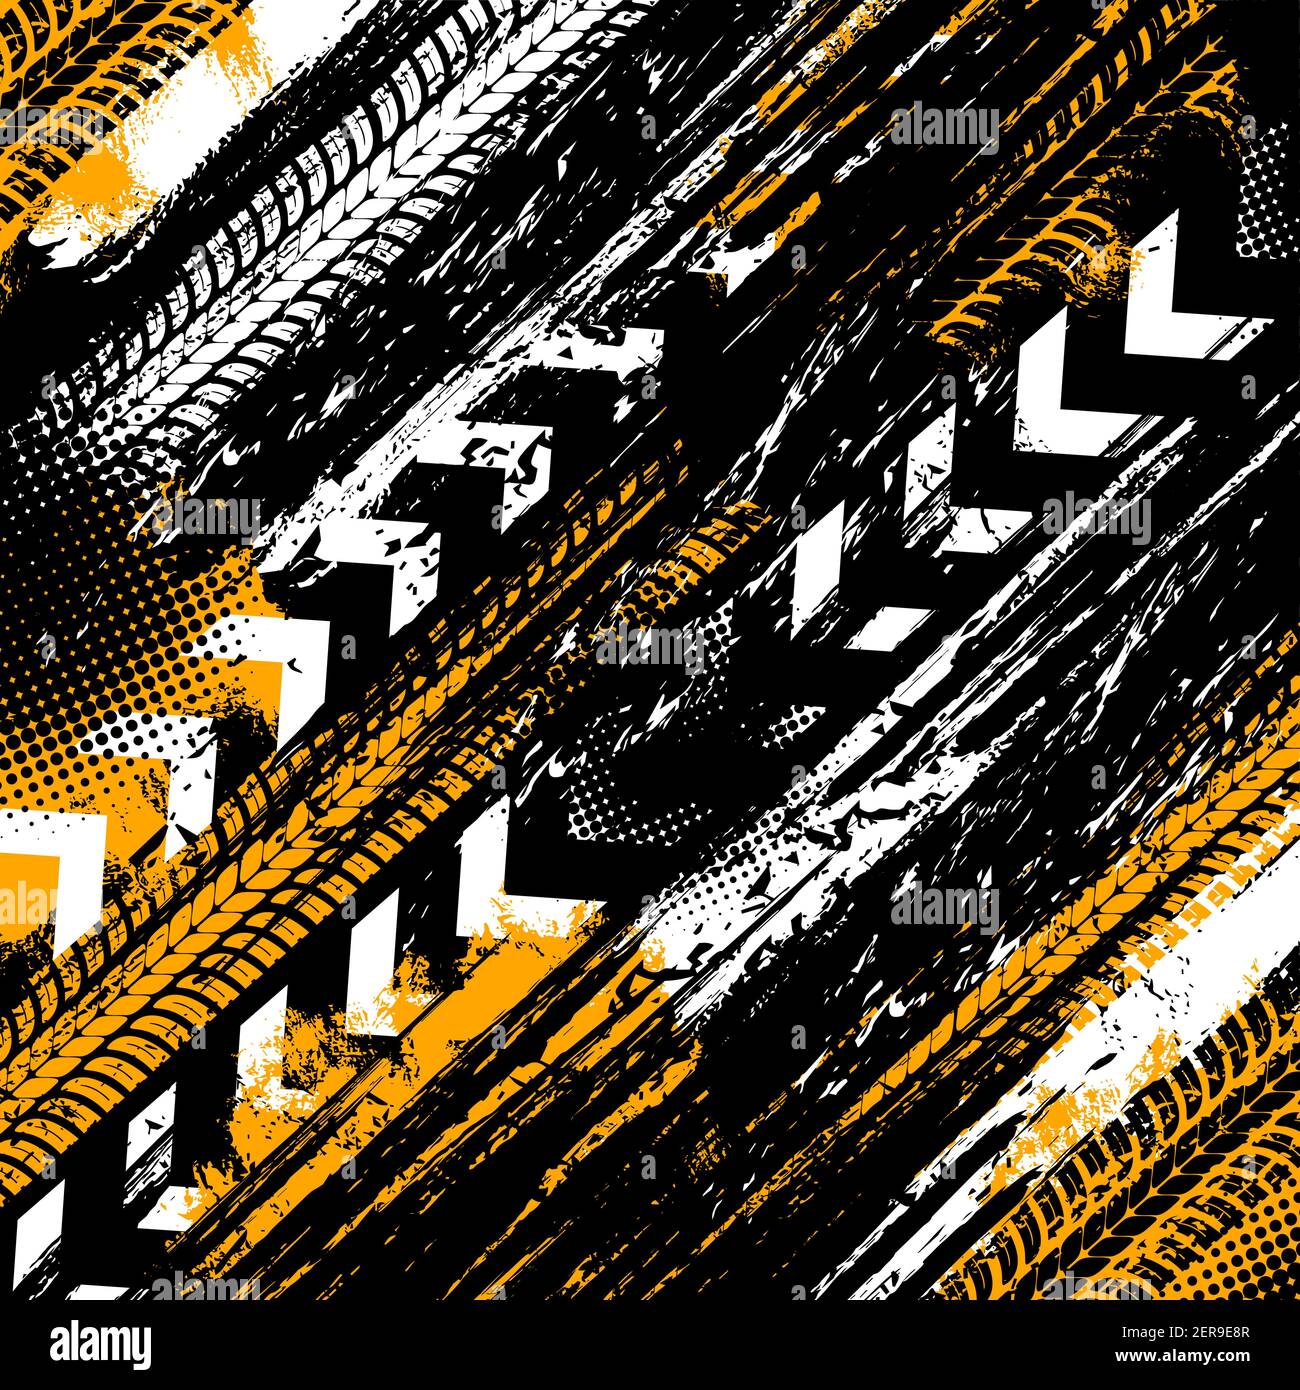 Abstract Racing Stripes Background With black, white and yellow